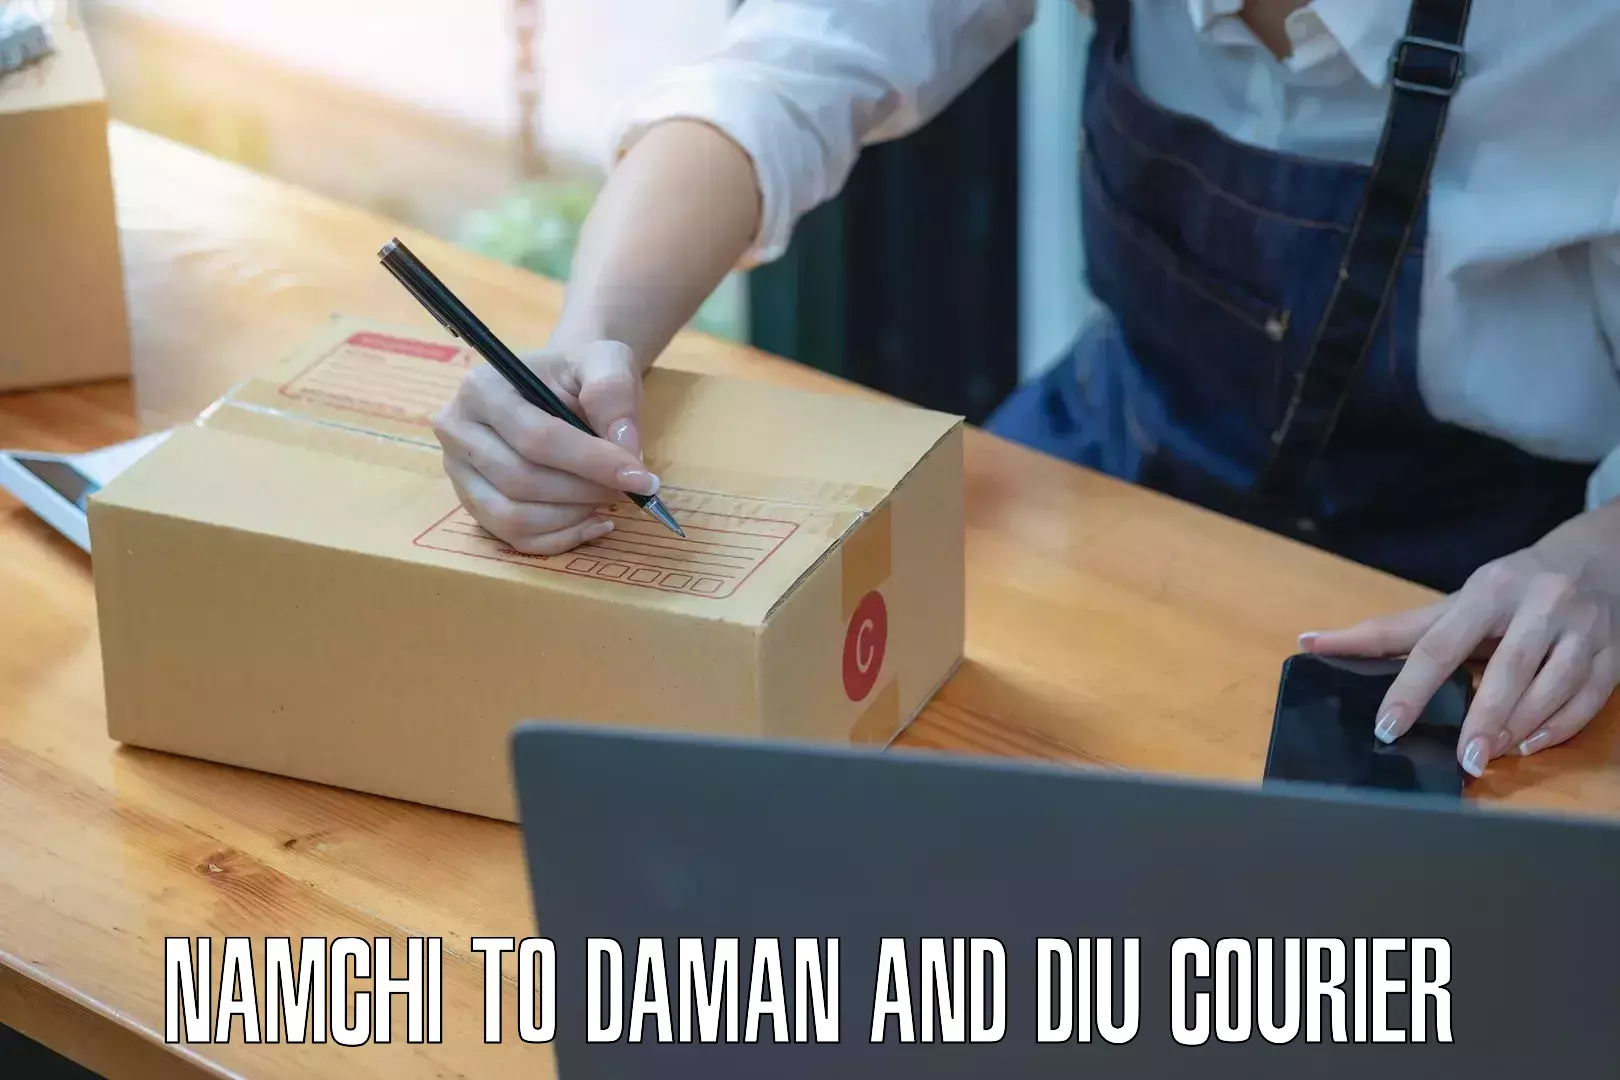 Courier service innovation Namchi to Daman